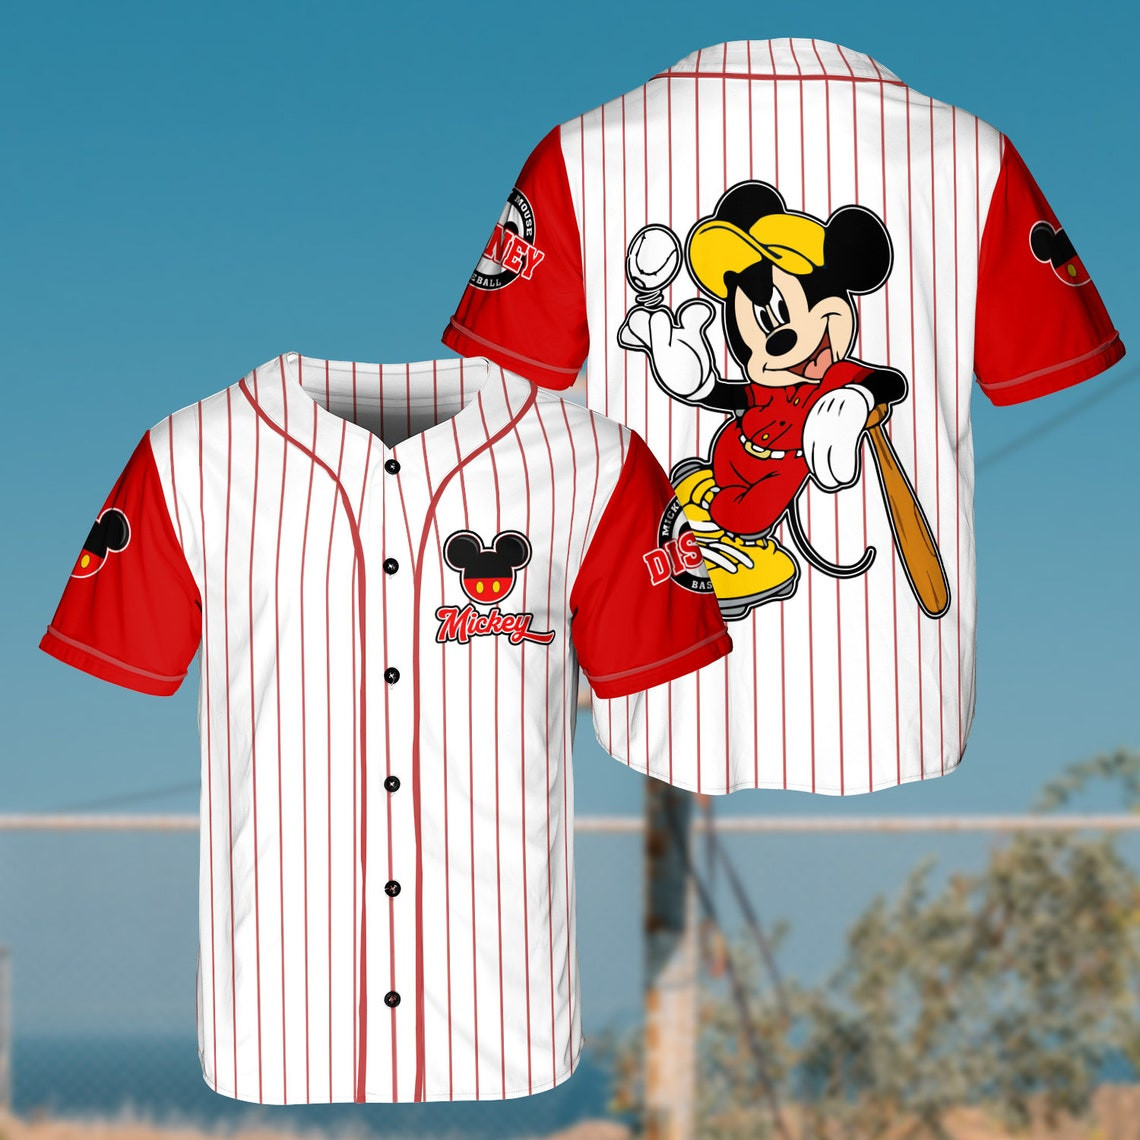 Mickey Disney Baseball Jersey Unisex Disney MLB Baseball Jersey Gift for Disney Lovers Gift for Father Day Gift for Dad